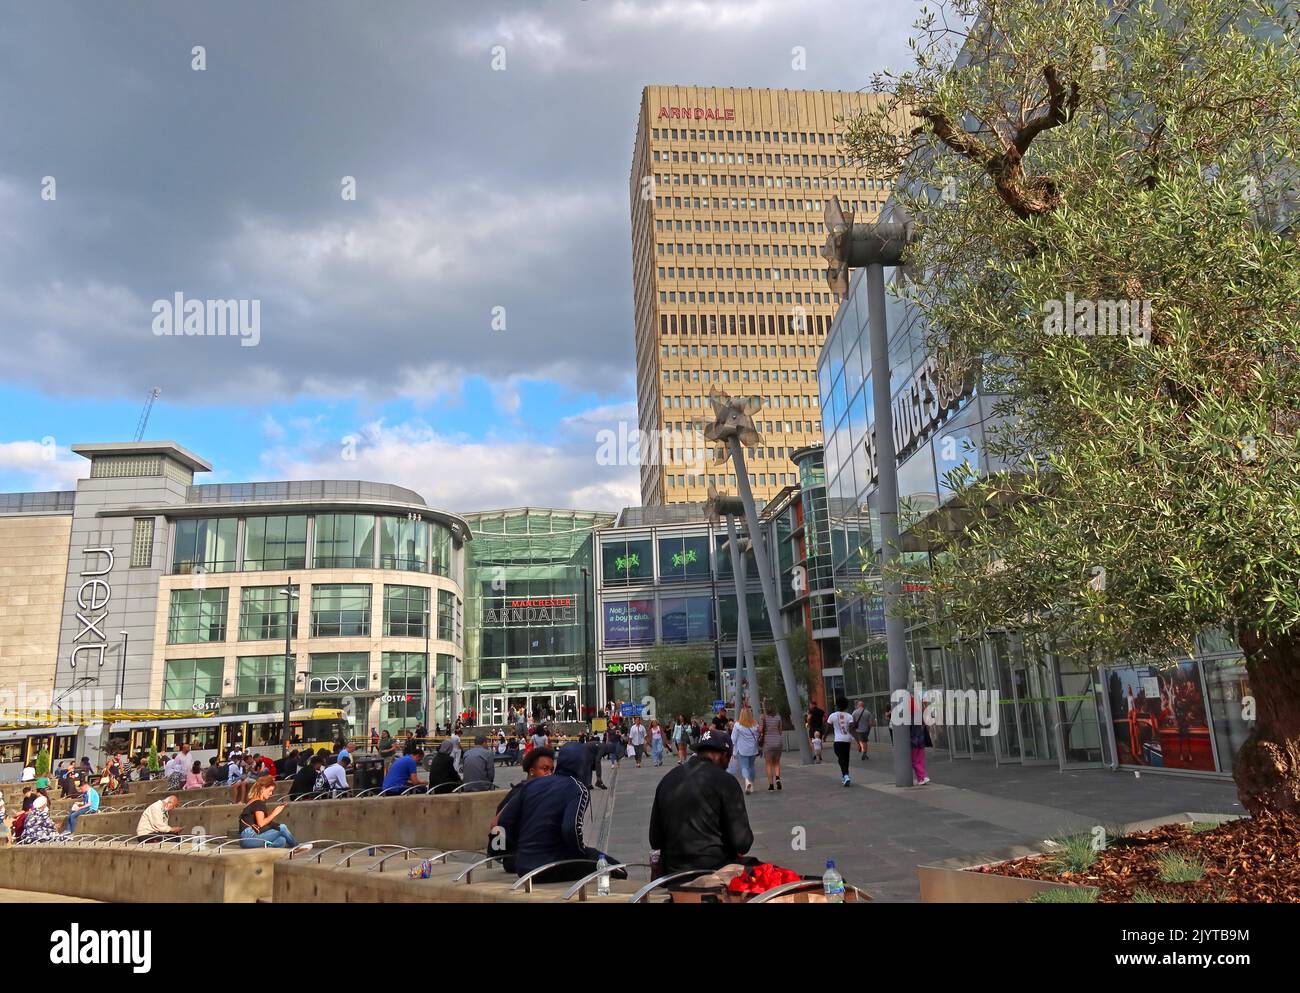 Exchange Square, Manchester - Public area with Next, Arndale Centre, Selfridges and other stores & shops, England, UK, M3 1BD Stock Photo